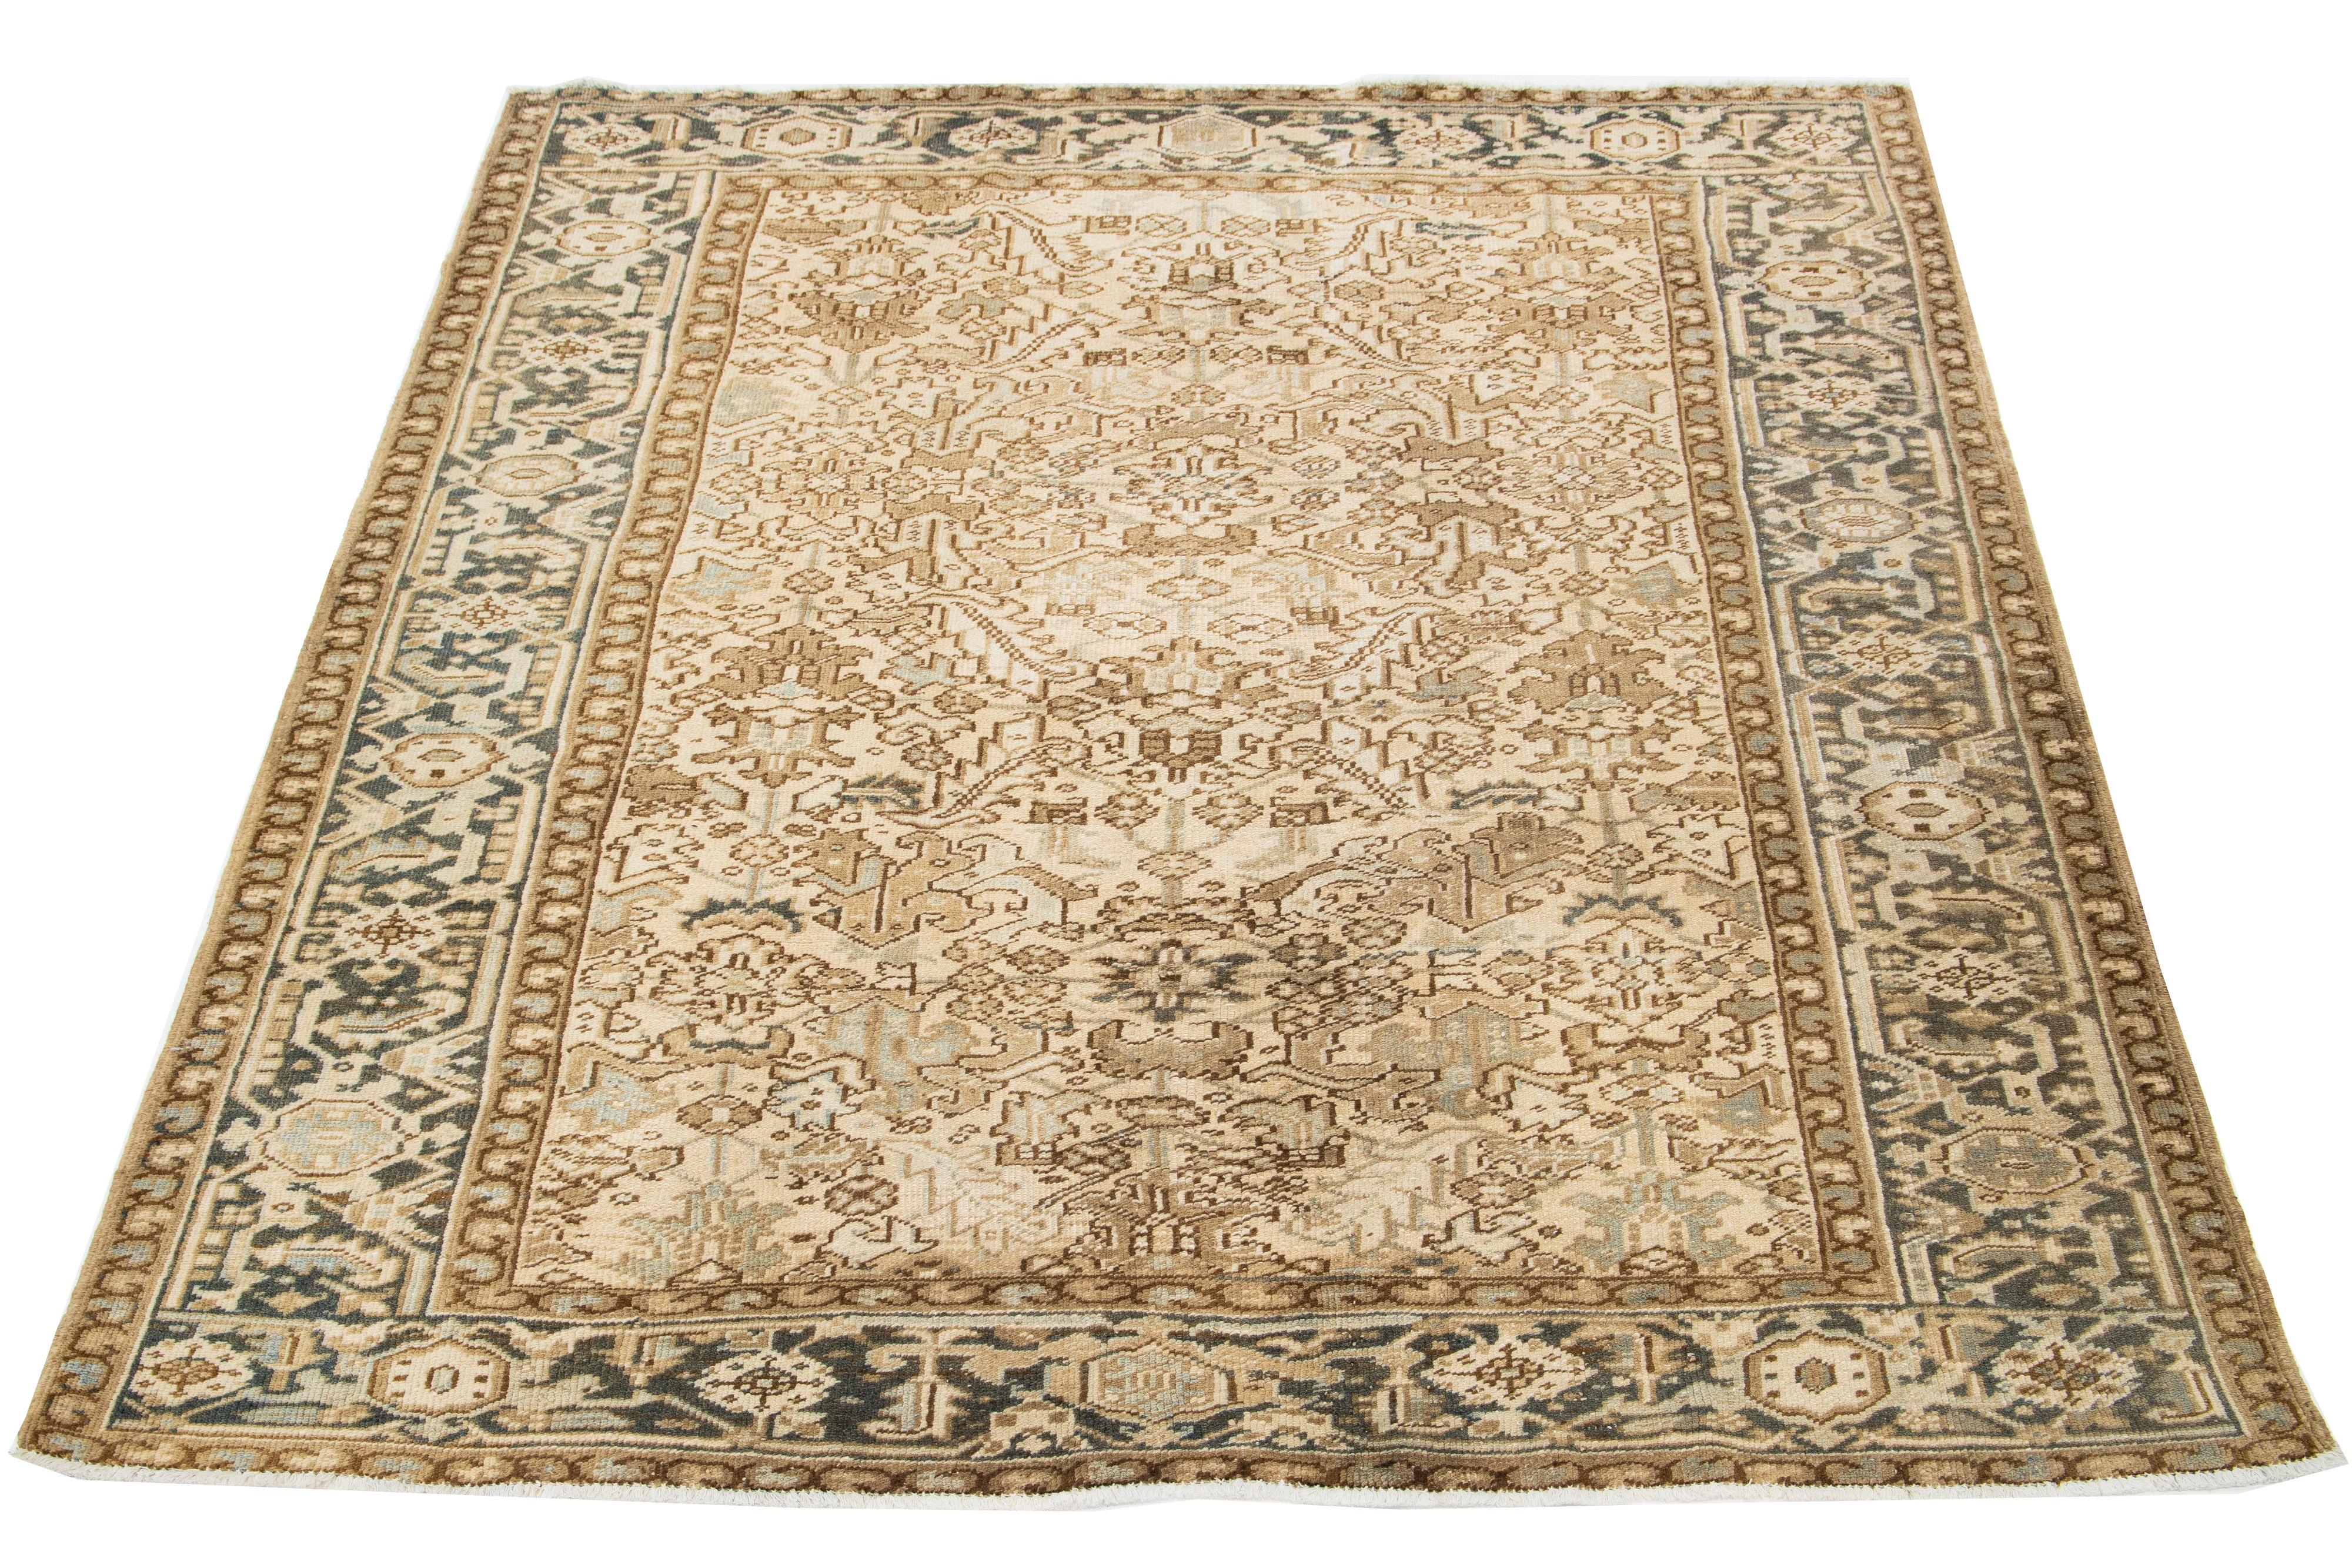 Antique Persian Heriz rug, hand-knotted wool, blue and light brown all-over pattern on a beige field.

This rug measures 7'3' x 8'7